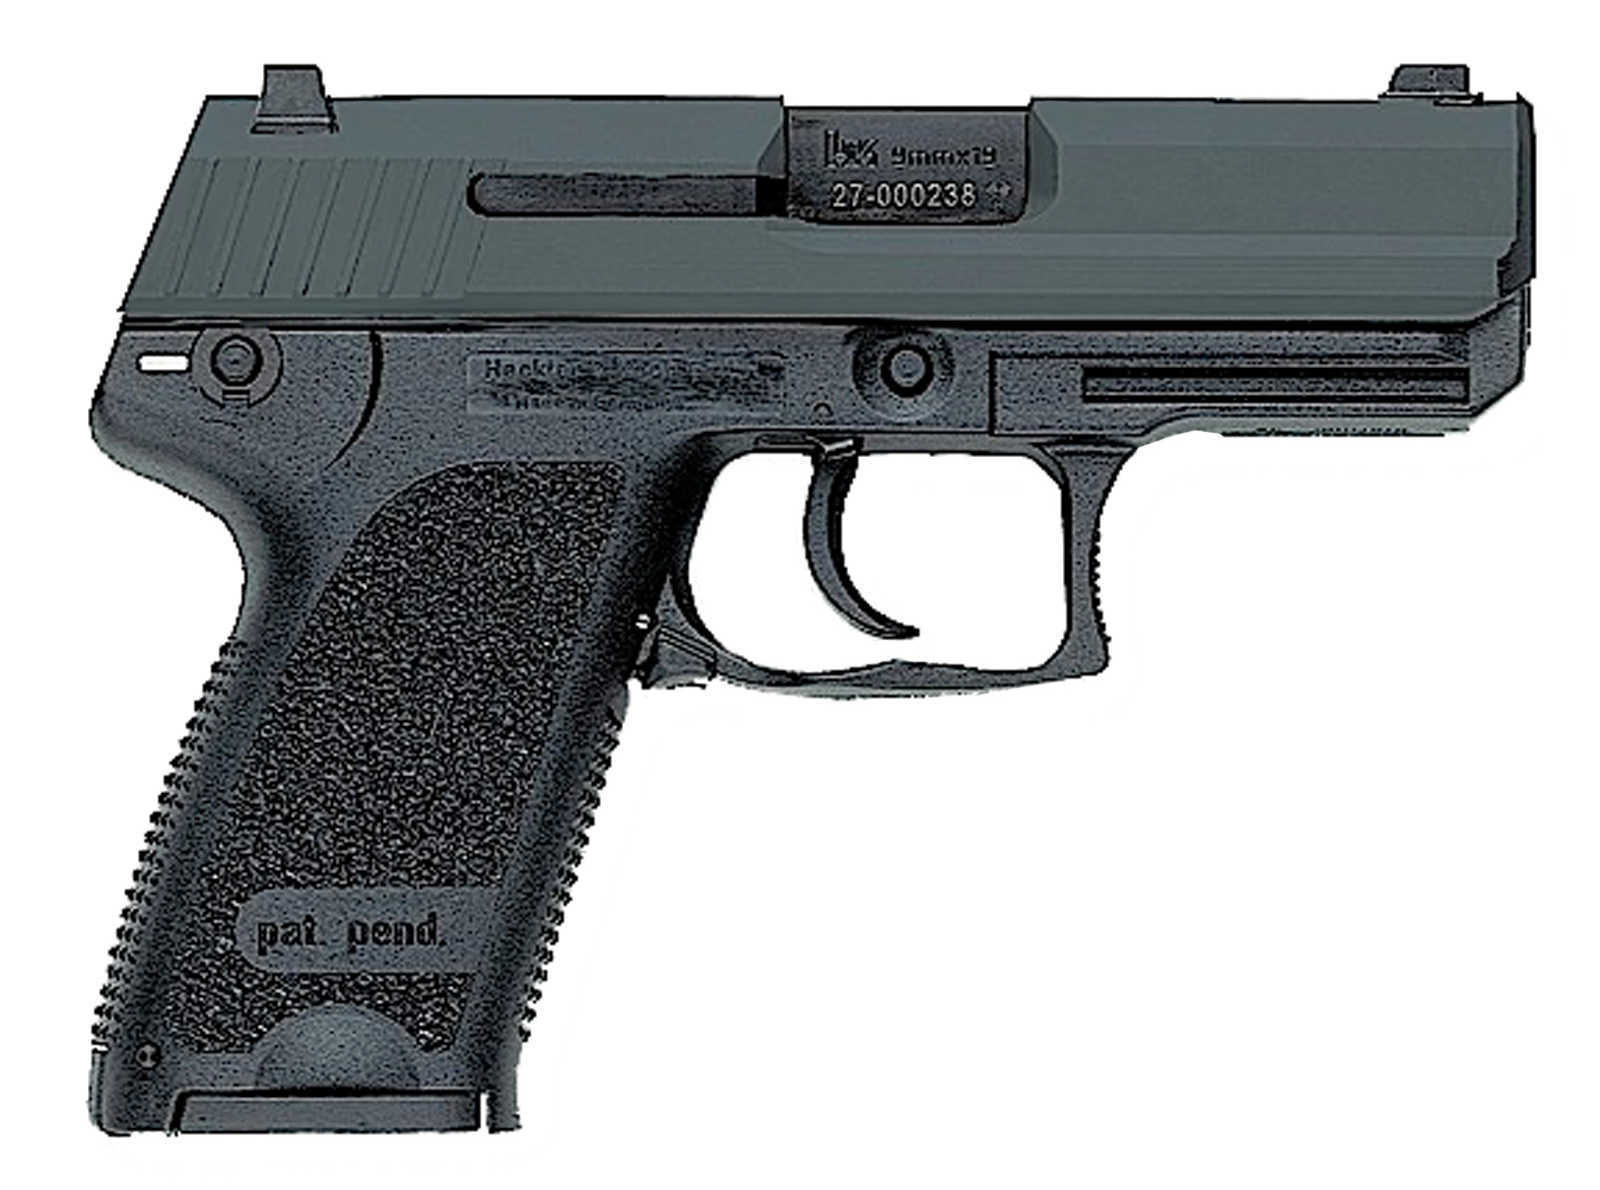 Heckler & Koch USP9 9mm Luger Compact 3.58" Barrel 13 Round V7 LEM Double Action Only Semi Automatic Pistol M709037-A5